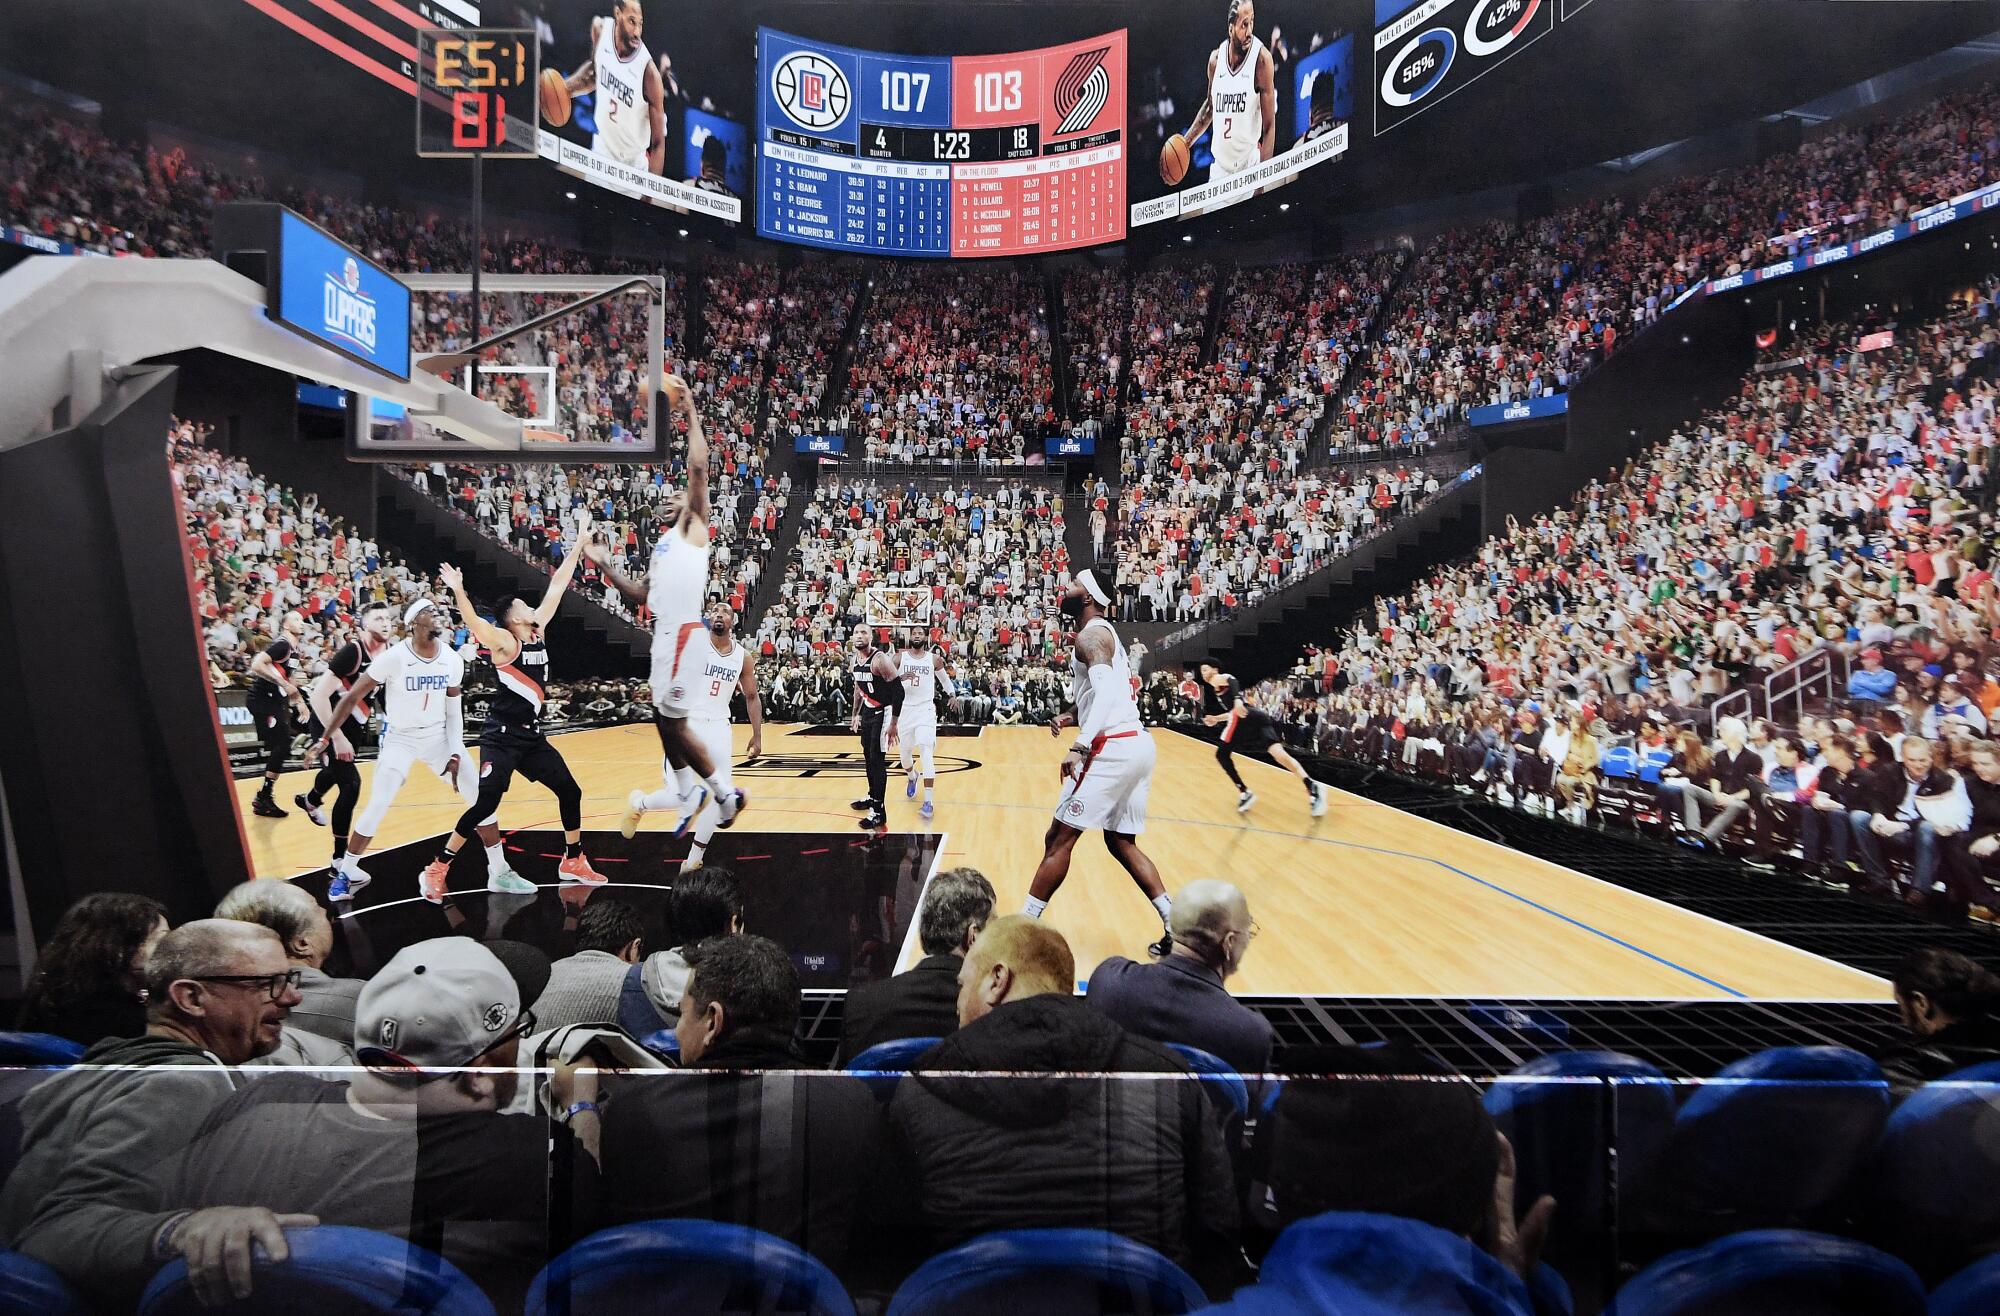 An artist's rendering of a game at The Intuit Dome shows the interior oval of the scoreboard.